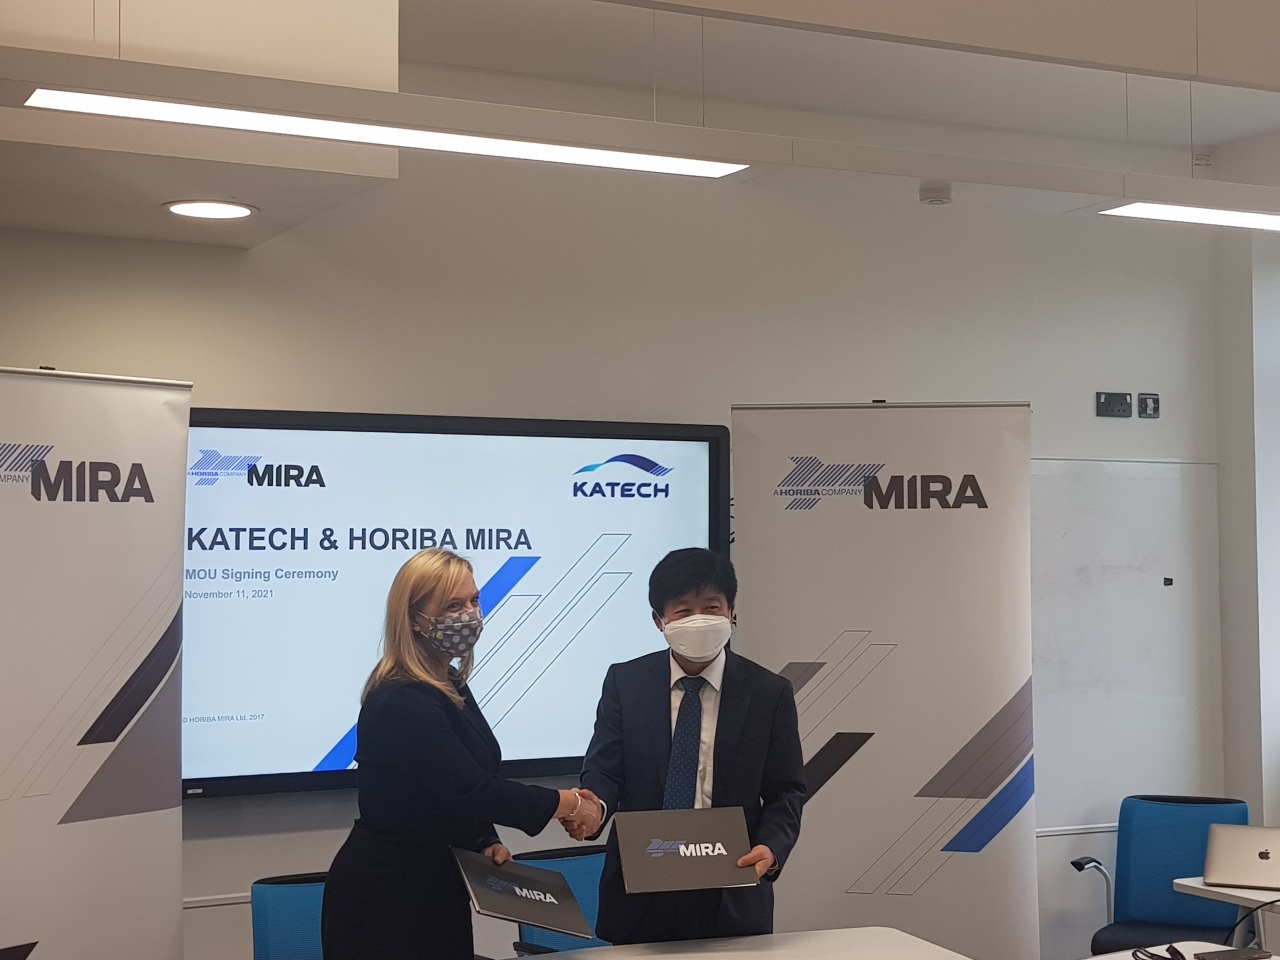 Katech Director Heo Nam-yong (right) and Horiba Mira’s Chief Commercial Officer Roisin Hopkins pose after signing an agreement on joint research and development, at Horiba Mira’s headquarters in Nuneaton, England, Thursday (Greenwich Mean Time). (Katech)